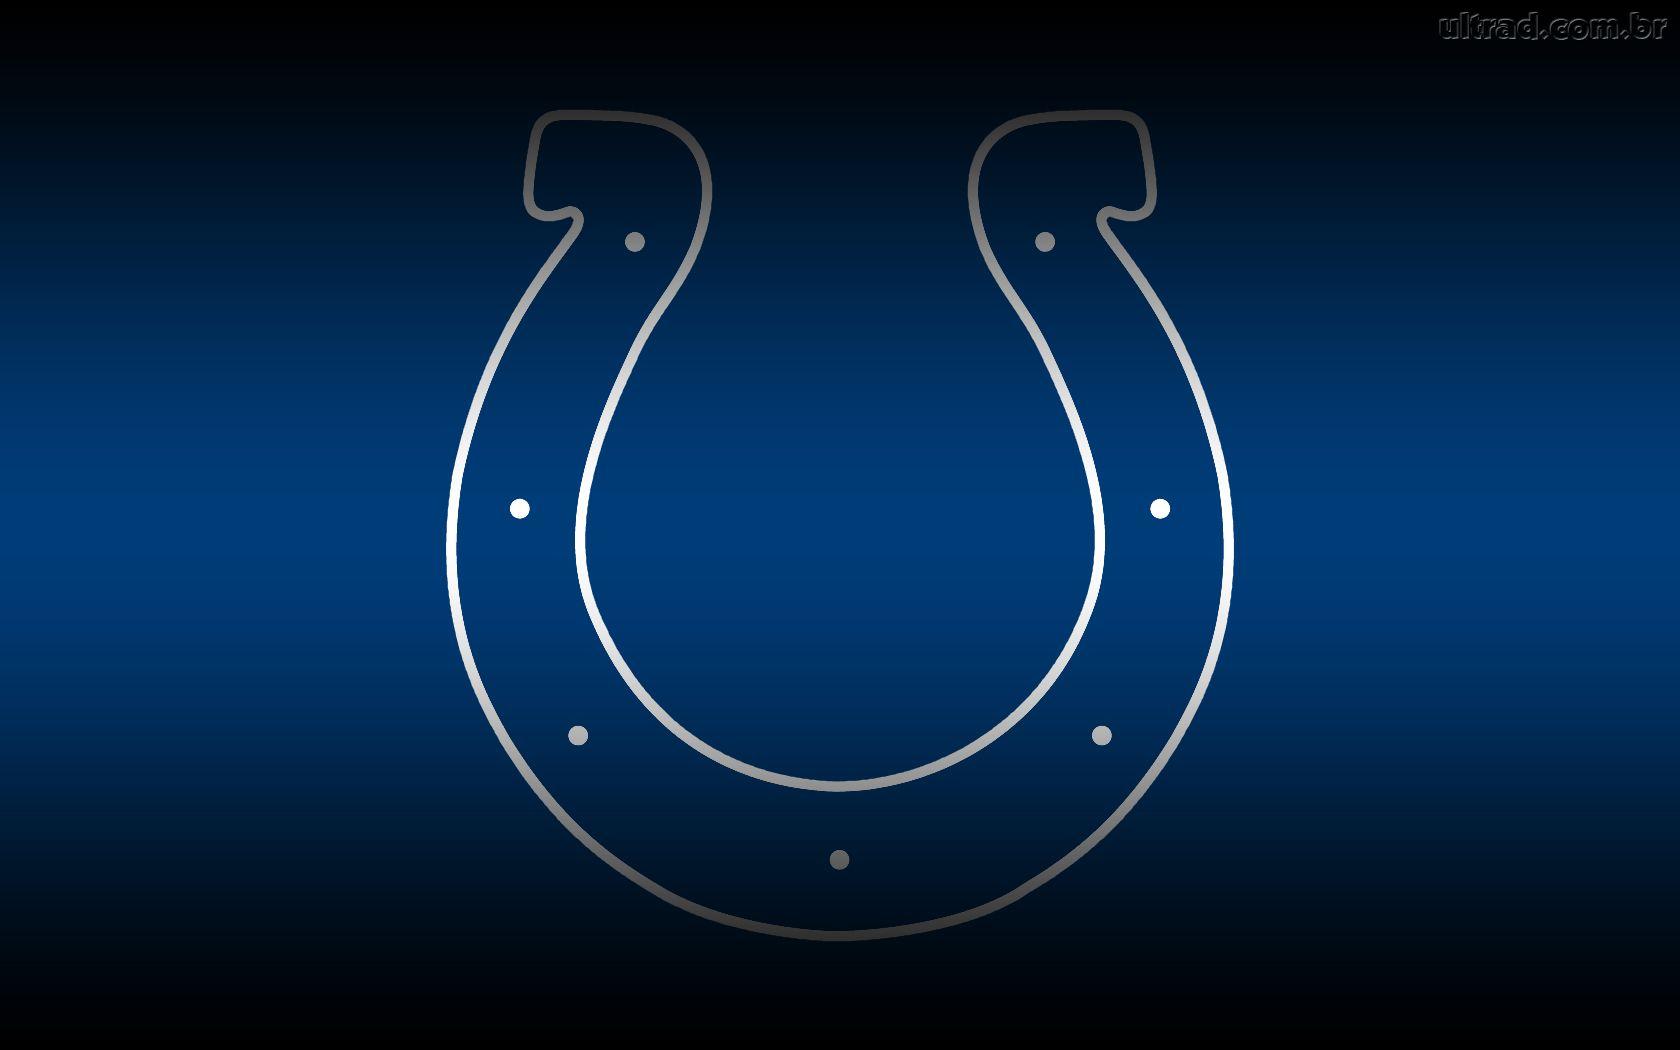 Indianapolis Colts Wallpaper. HD Wallpaper Early